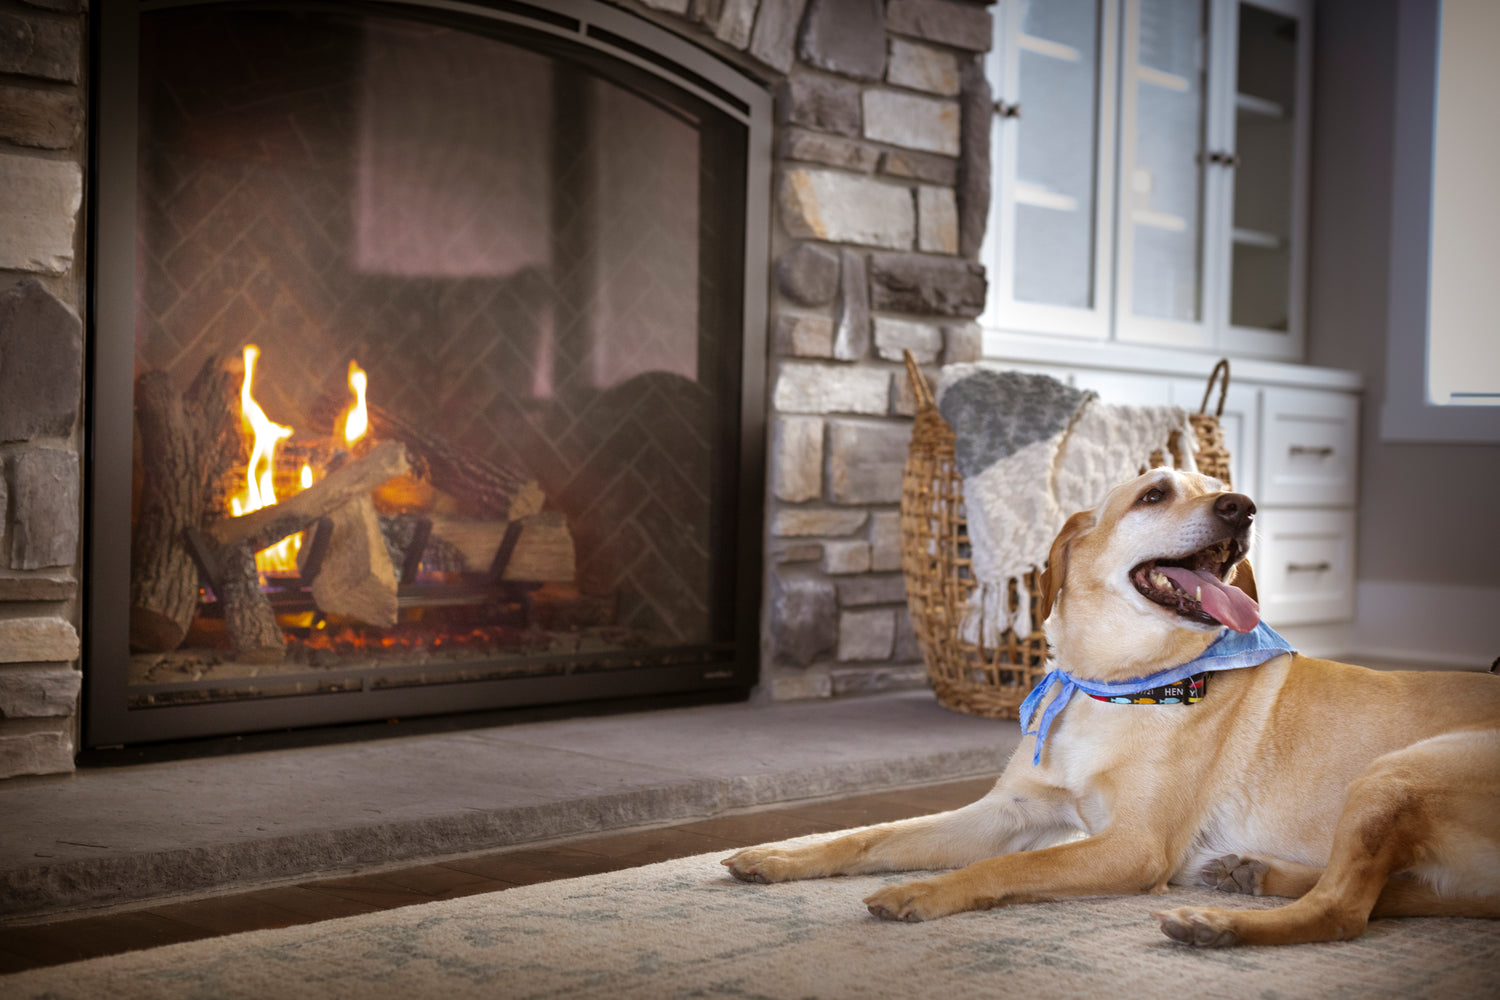 Dog laying in front of a lit fireplace inside a home